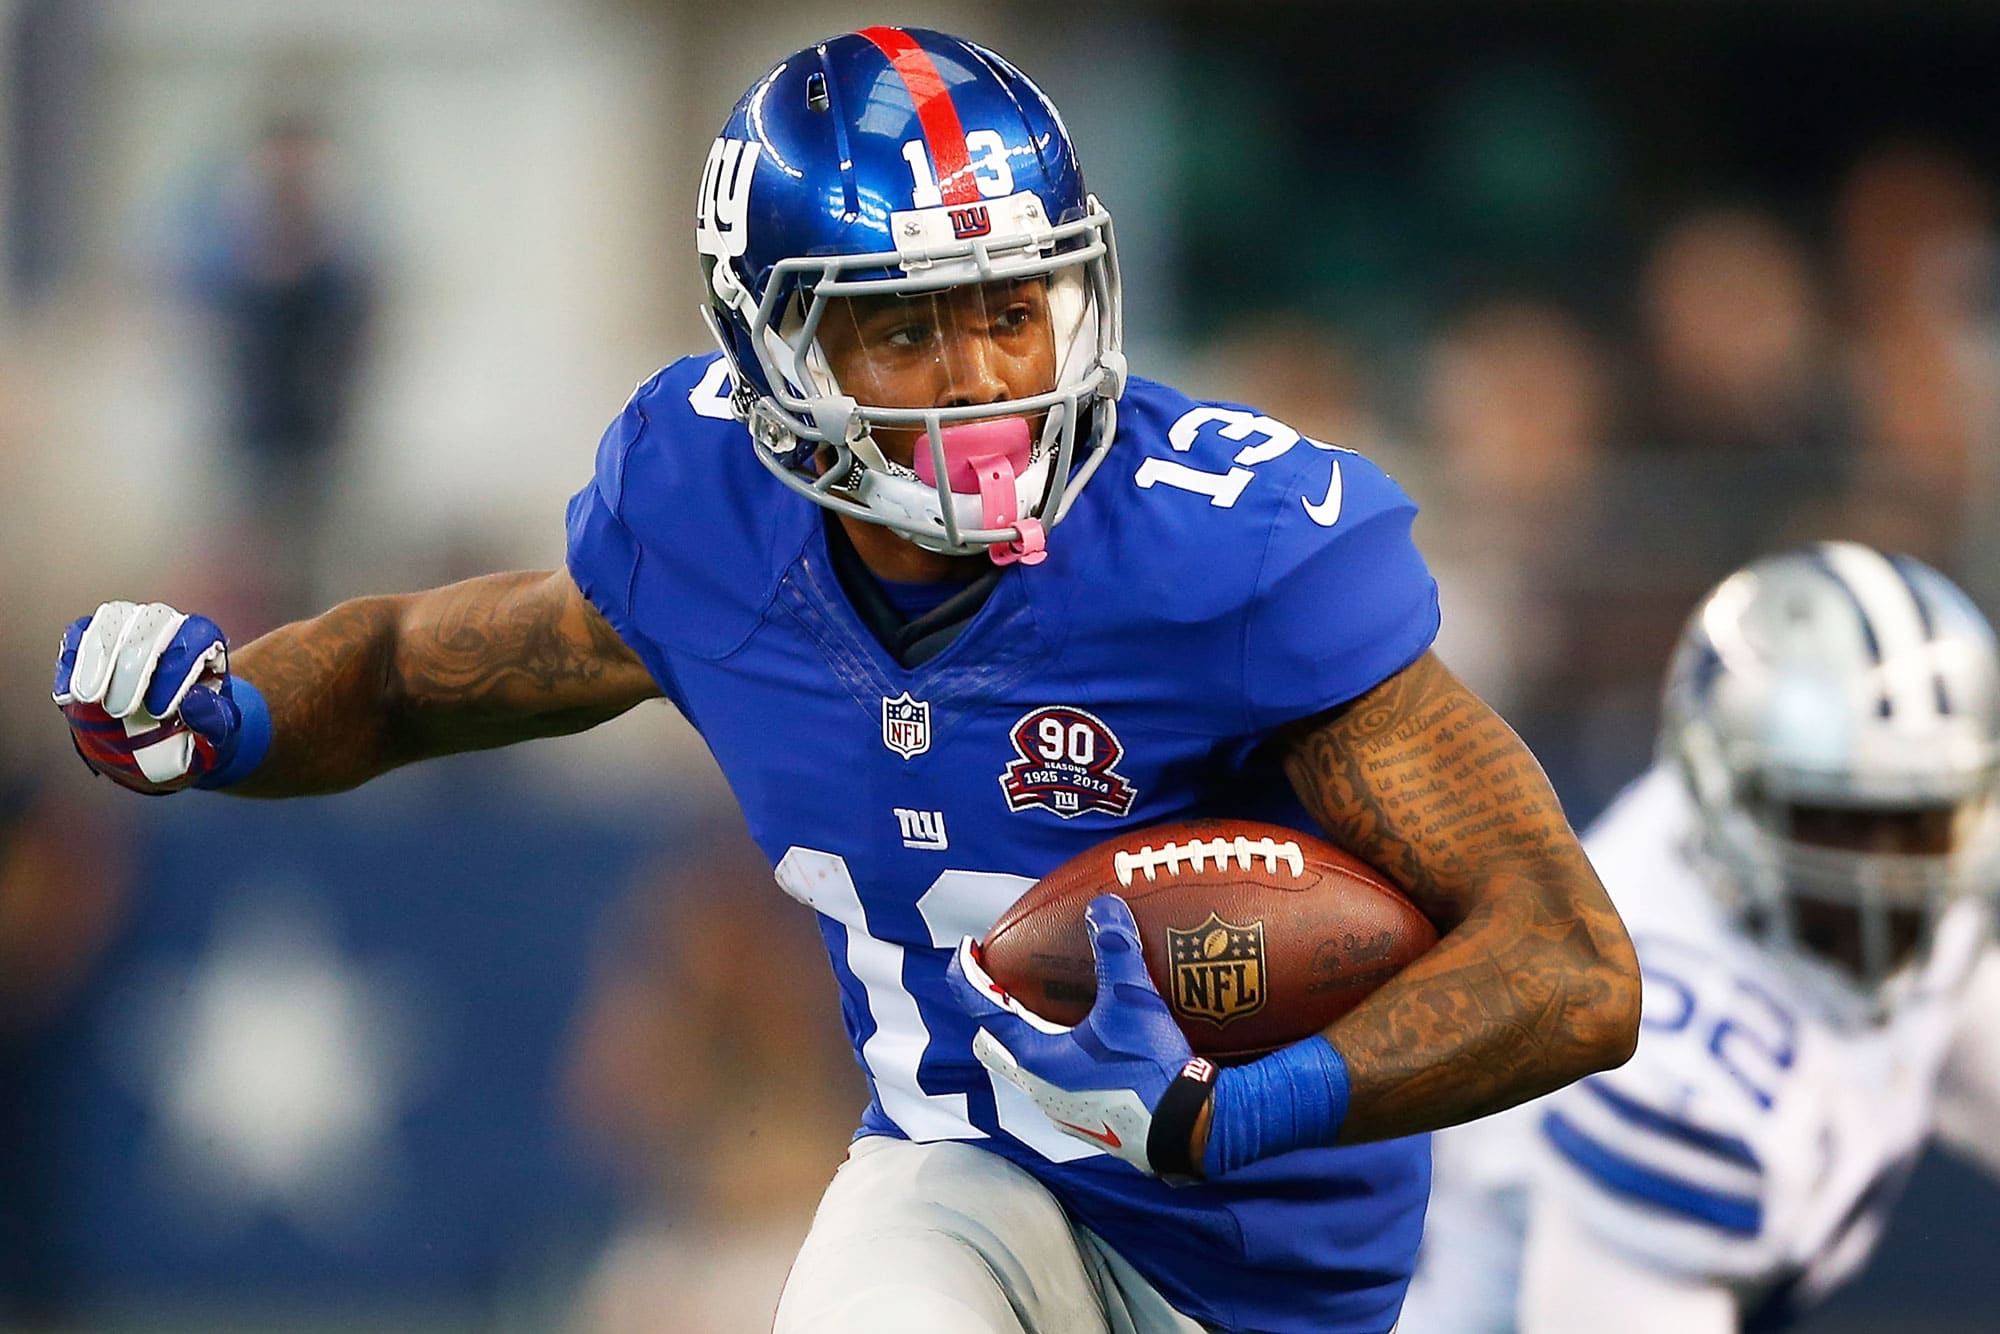 NY Giants trade Odell Beckham to the Cleveland Browns, Jets get Le